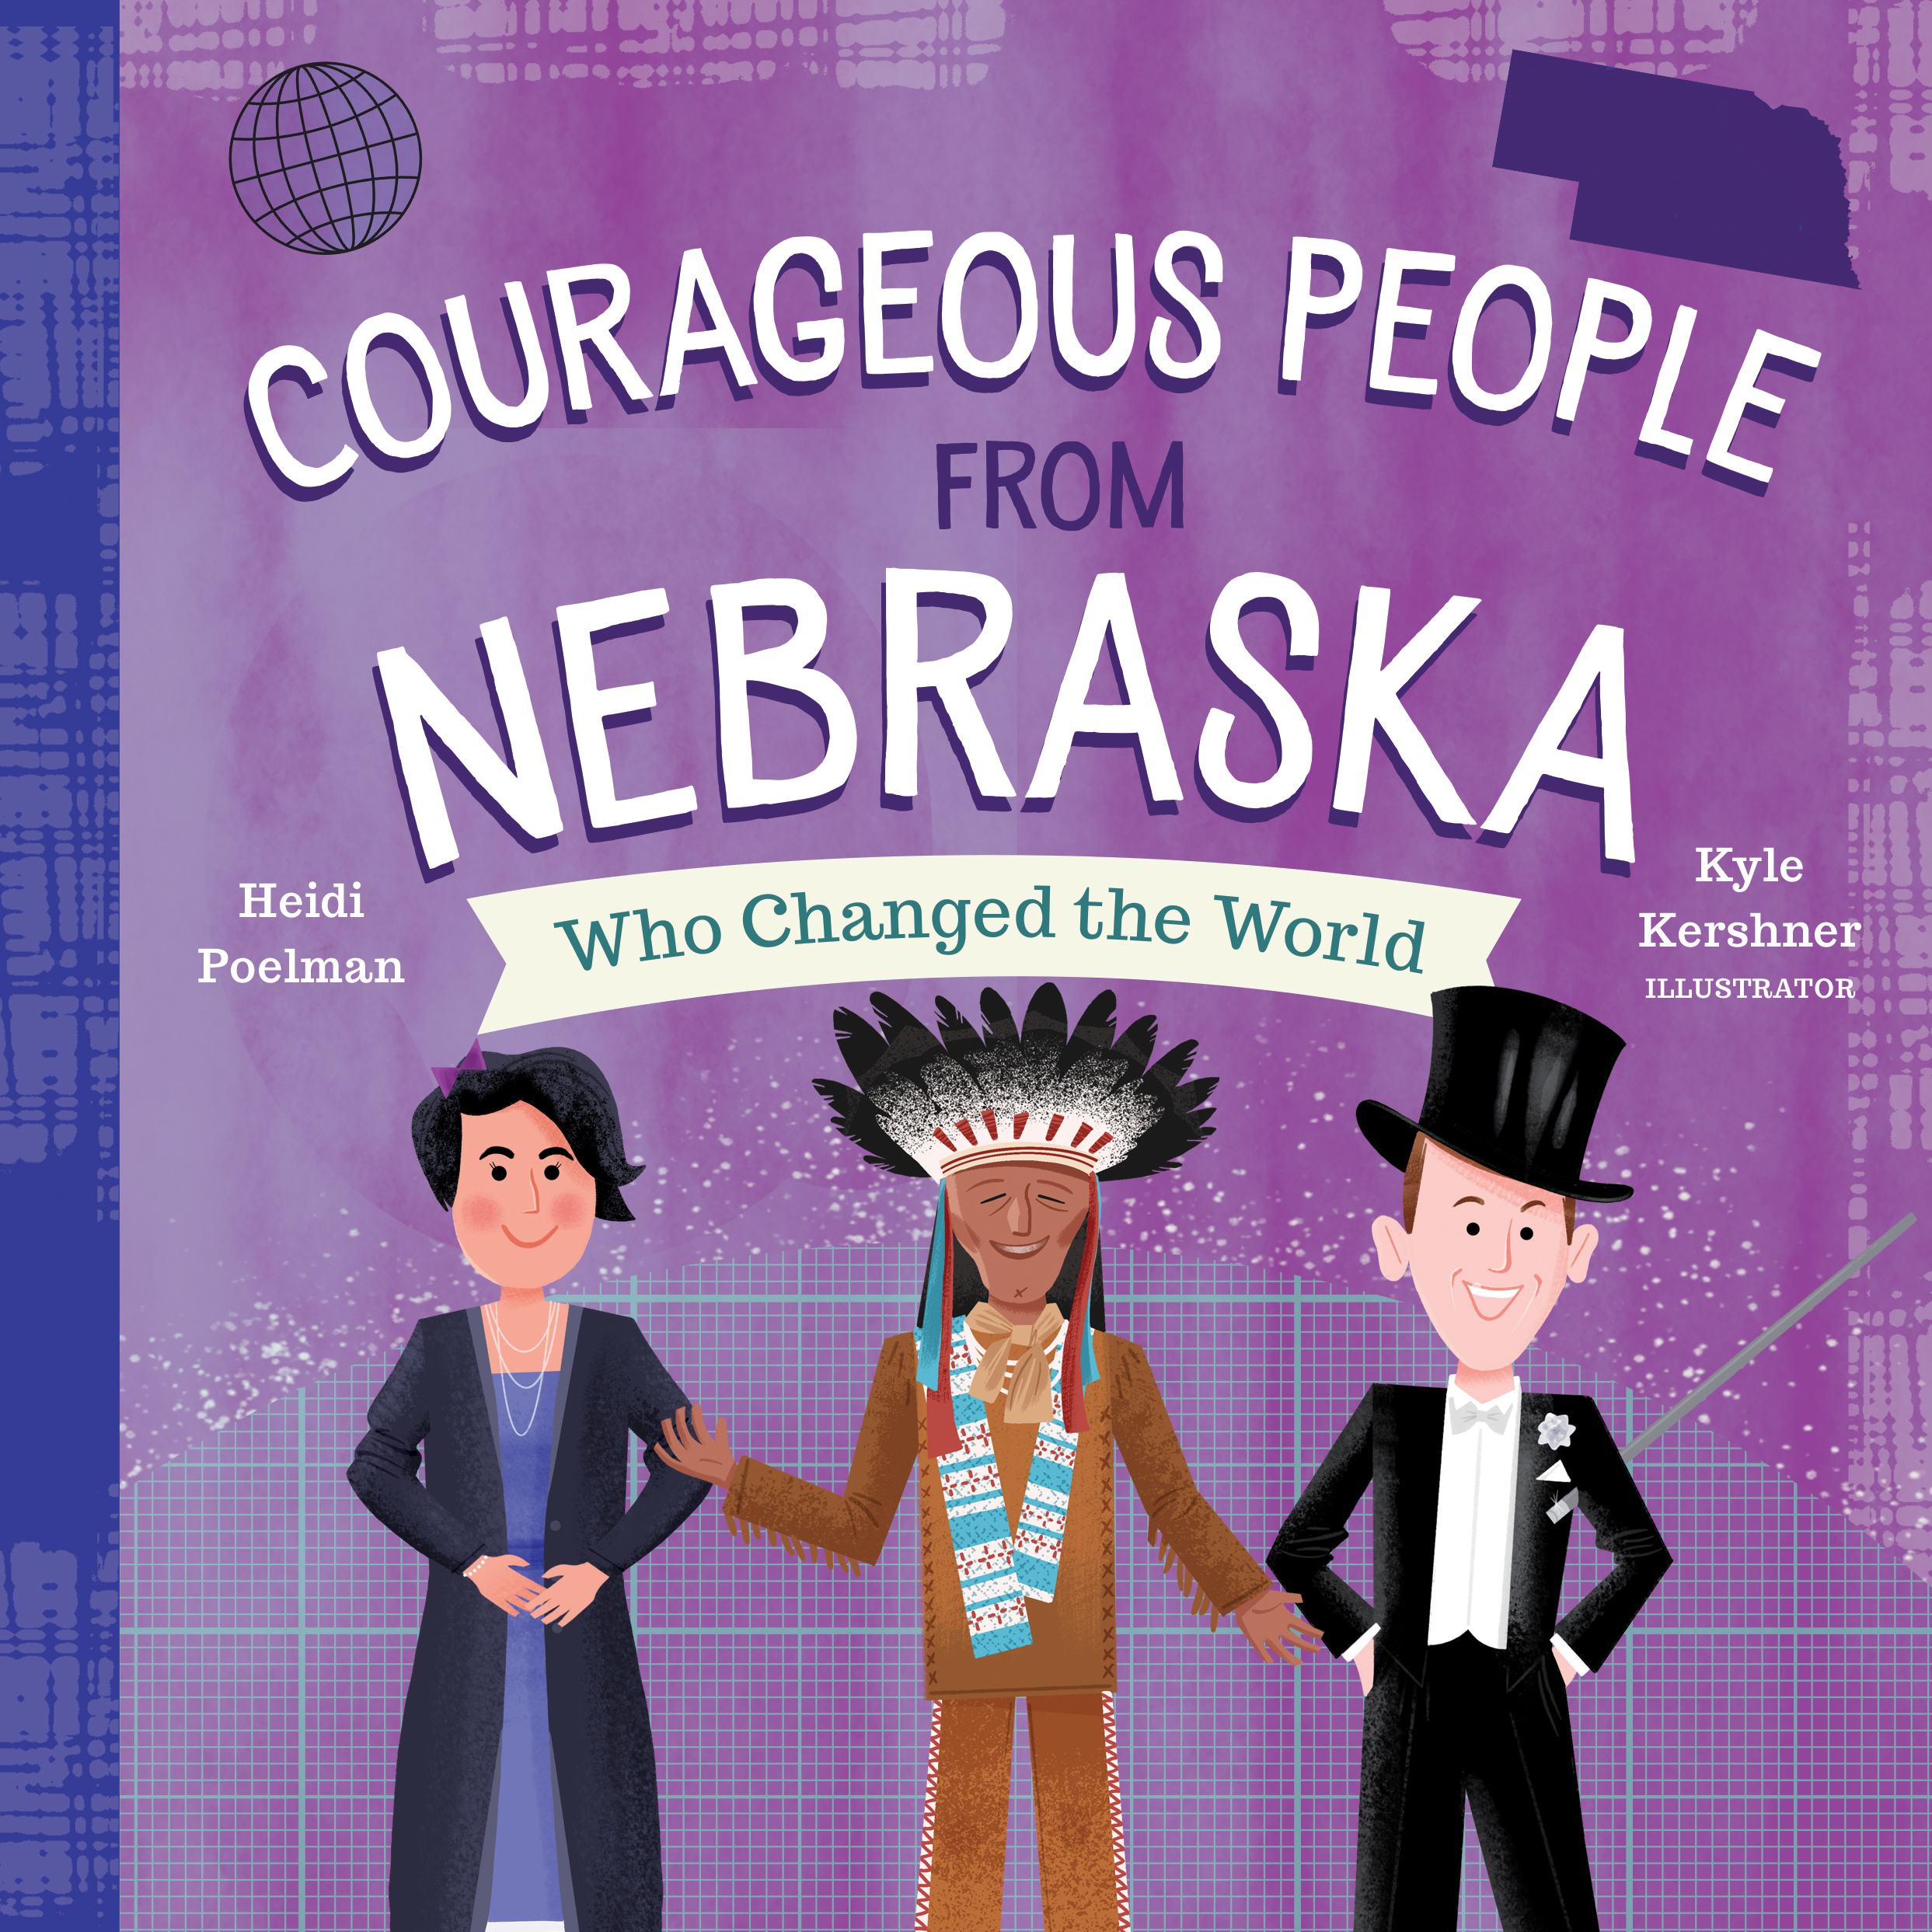 Courageous People from Nebraska Who Changed the World